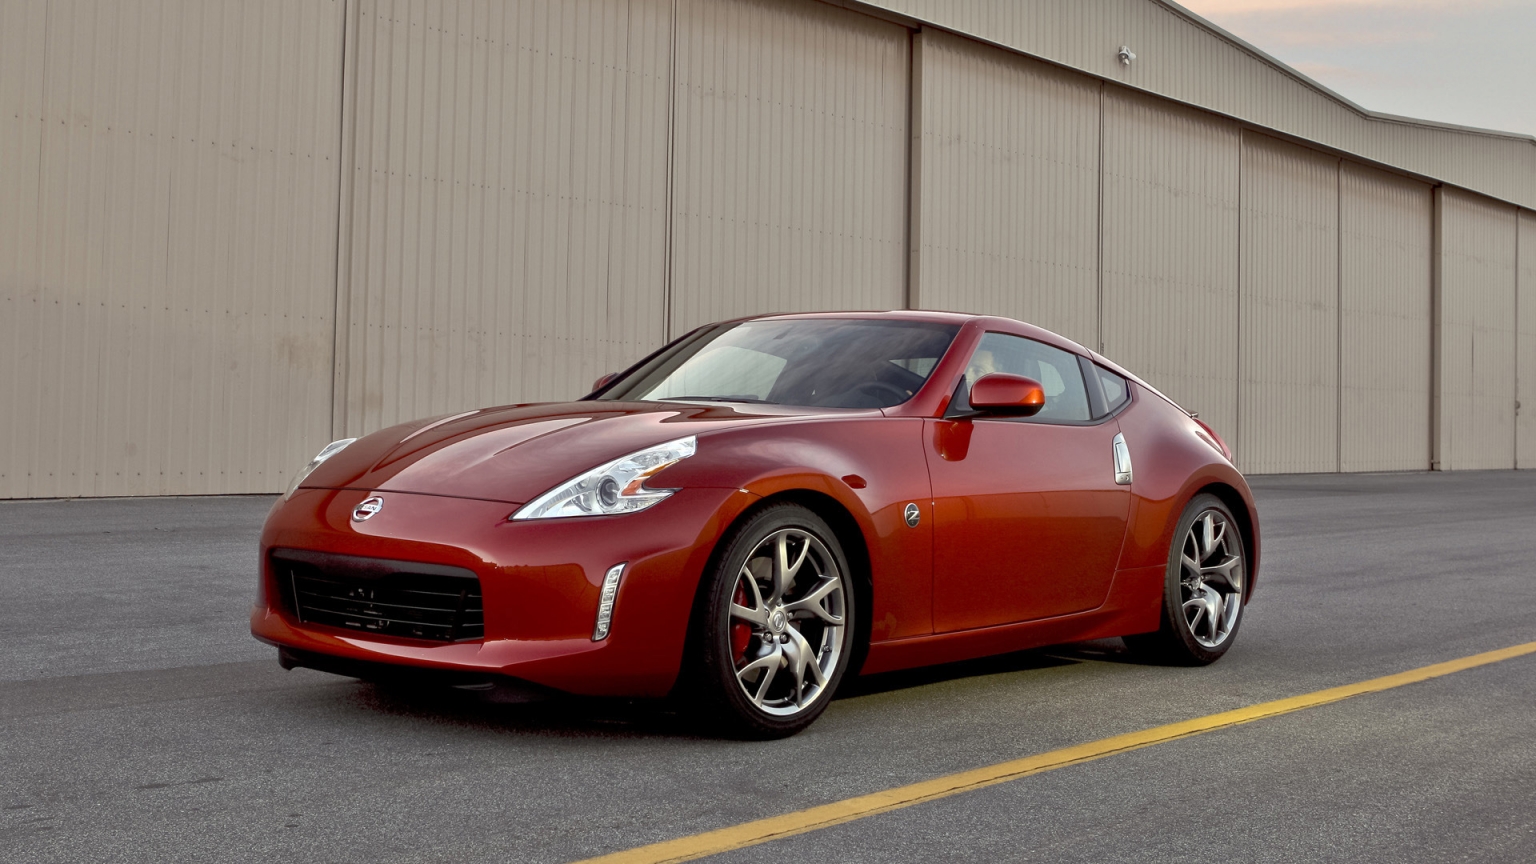 2013 Nissan 370Z Magma Red for 1536 x 864 HDTV resolution